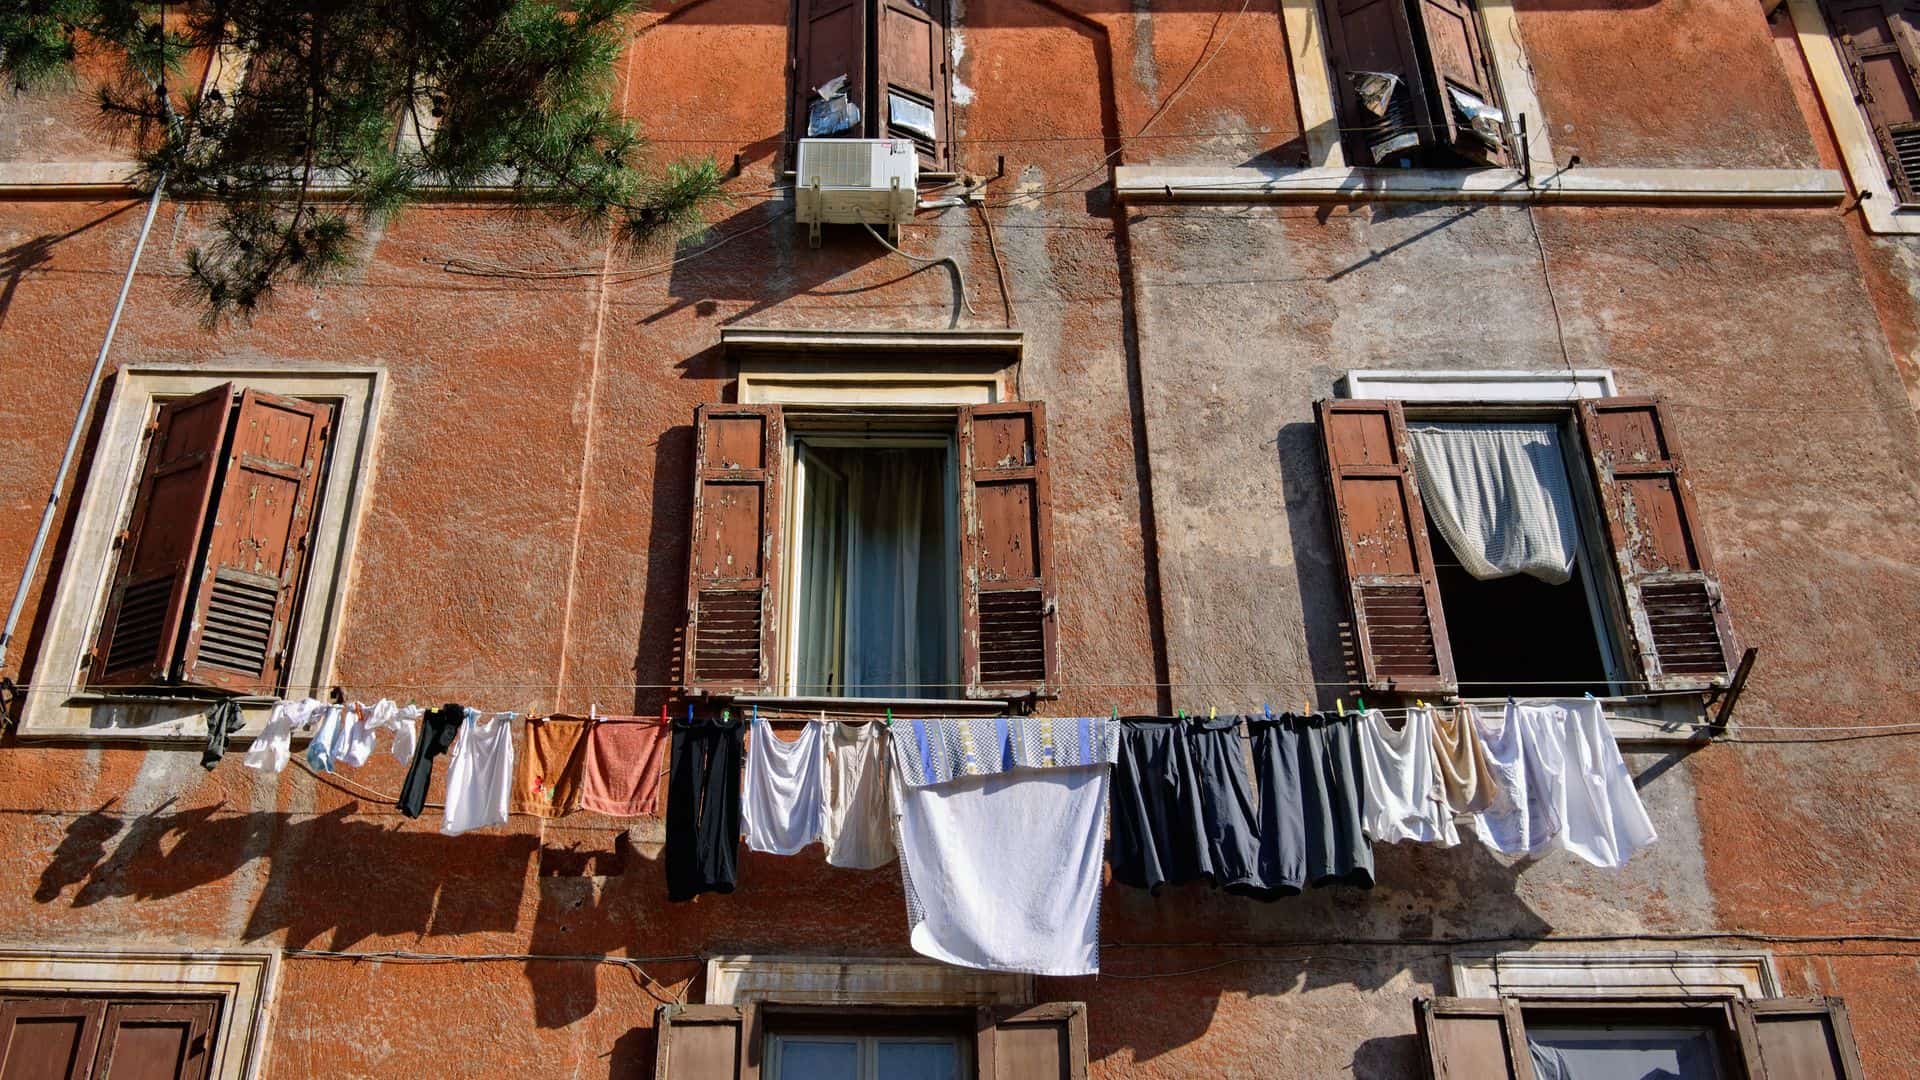 Clothes hanging from a window in a building in Garbatella.